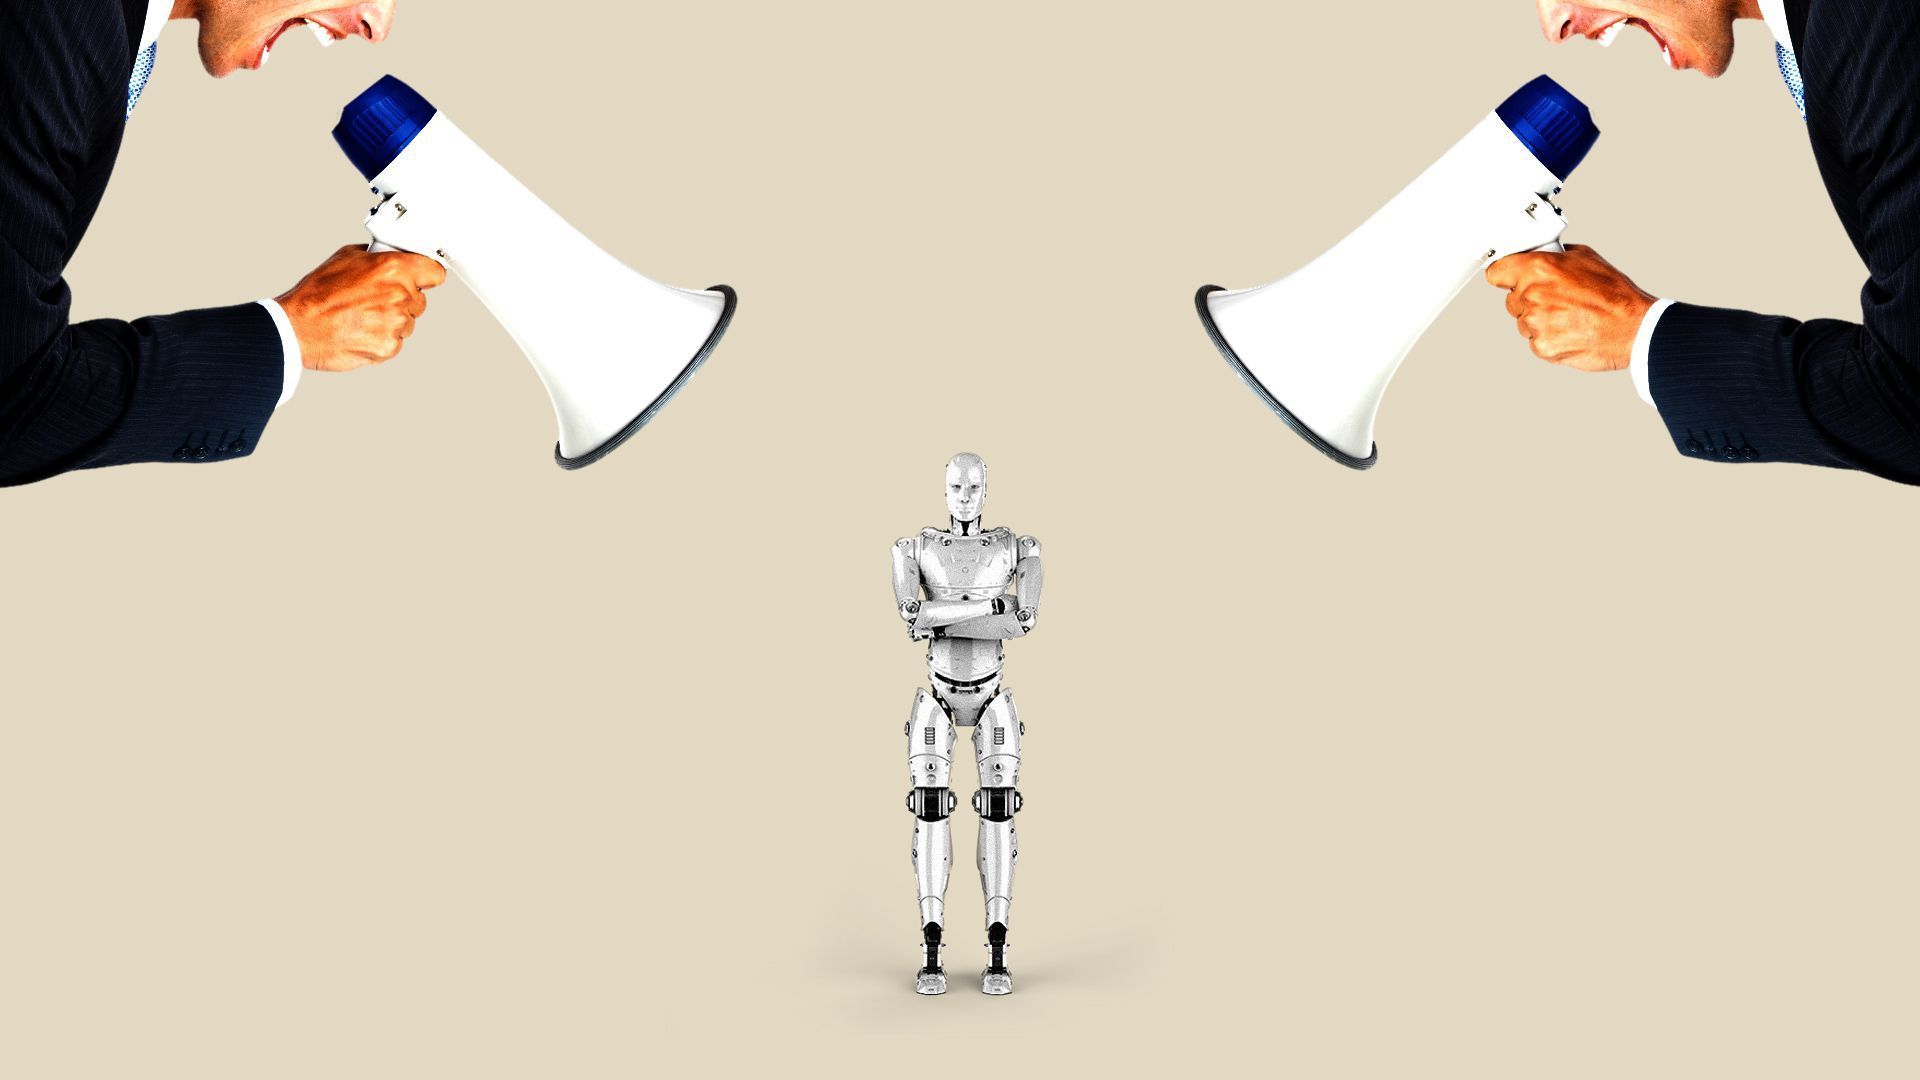 Illustration of people with megaphones yelling over an AI robot.